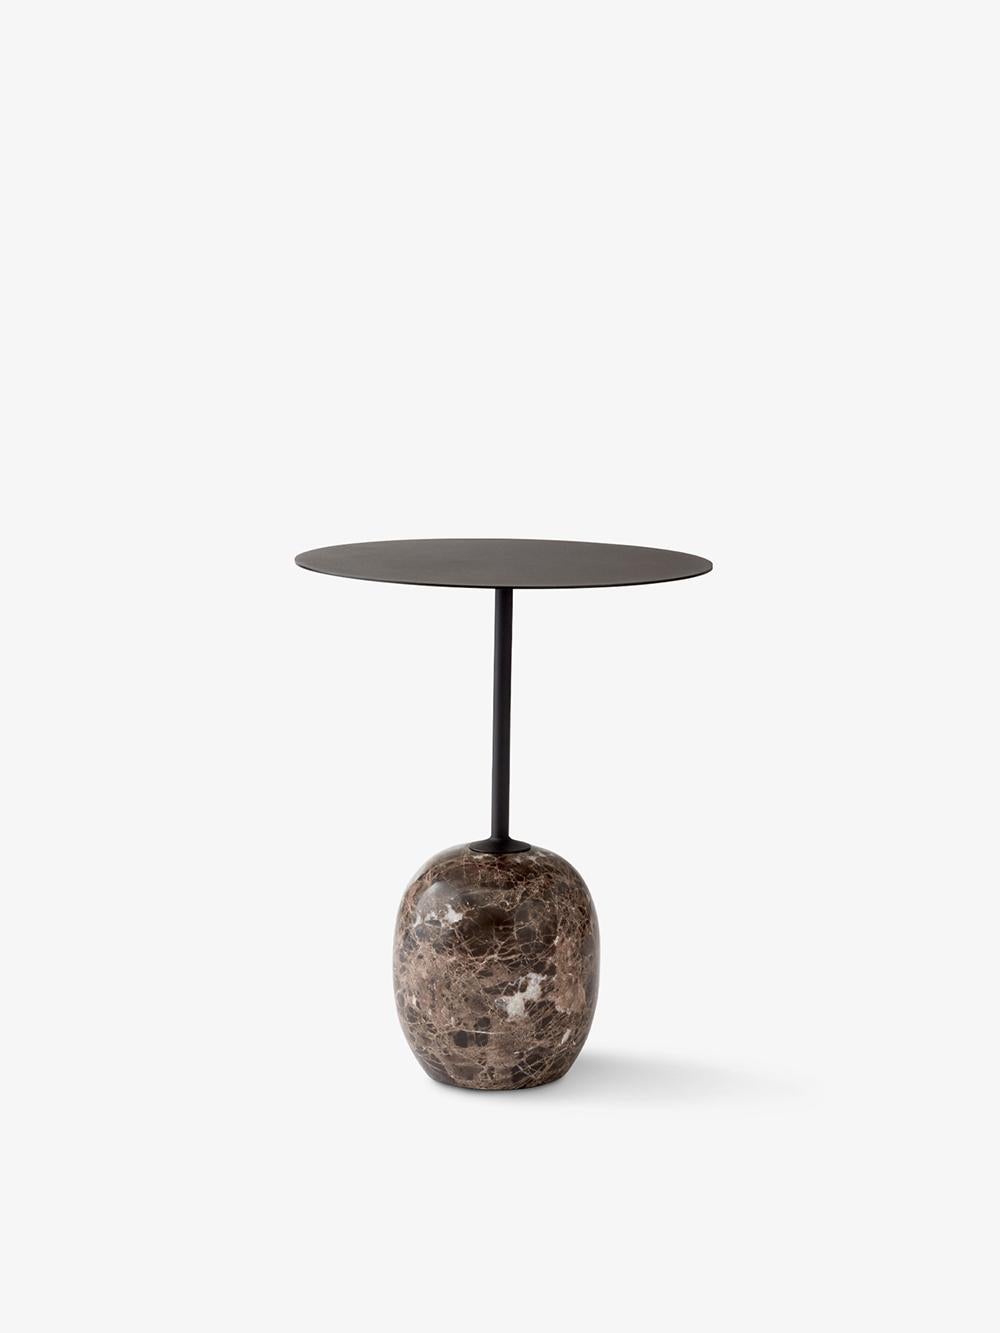 At first glance, Lato resembles a sculpture, with its slim, oval and round table top balanced by an oval-shaped base. 
Striking, graphic and poetic, its purity of form is proof that simple is sophisticated. 
With Lato, Nichetto wanted to keep the